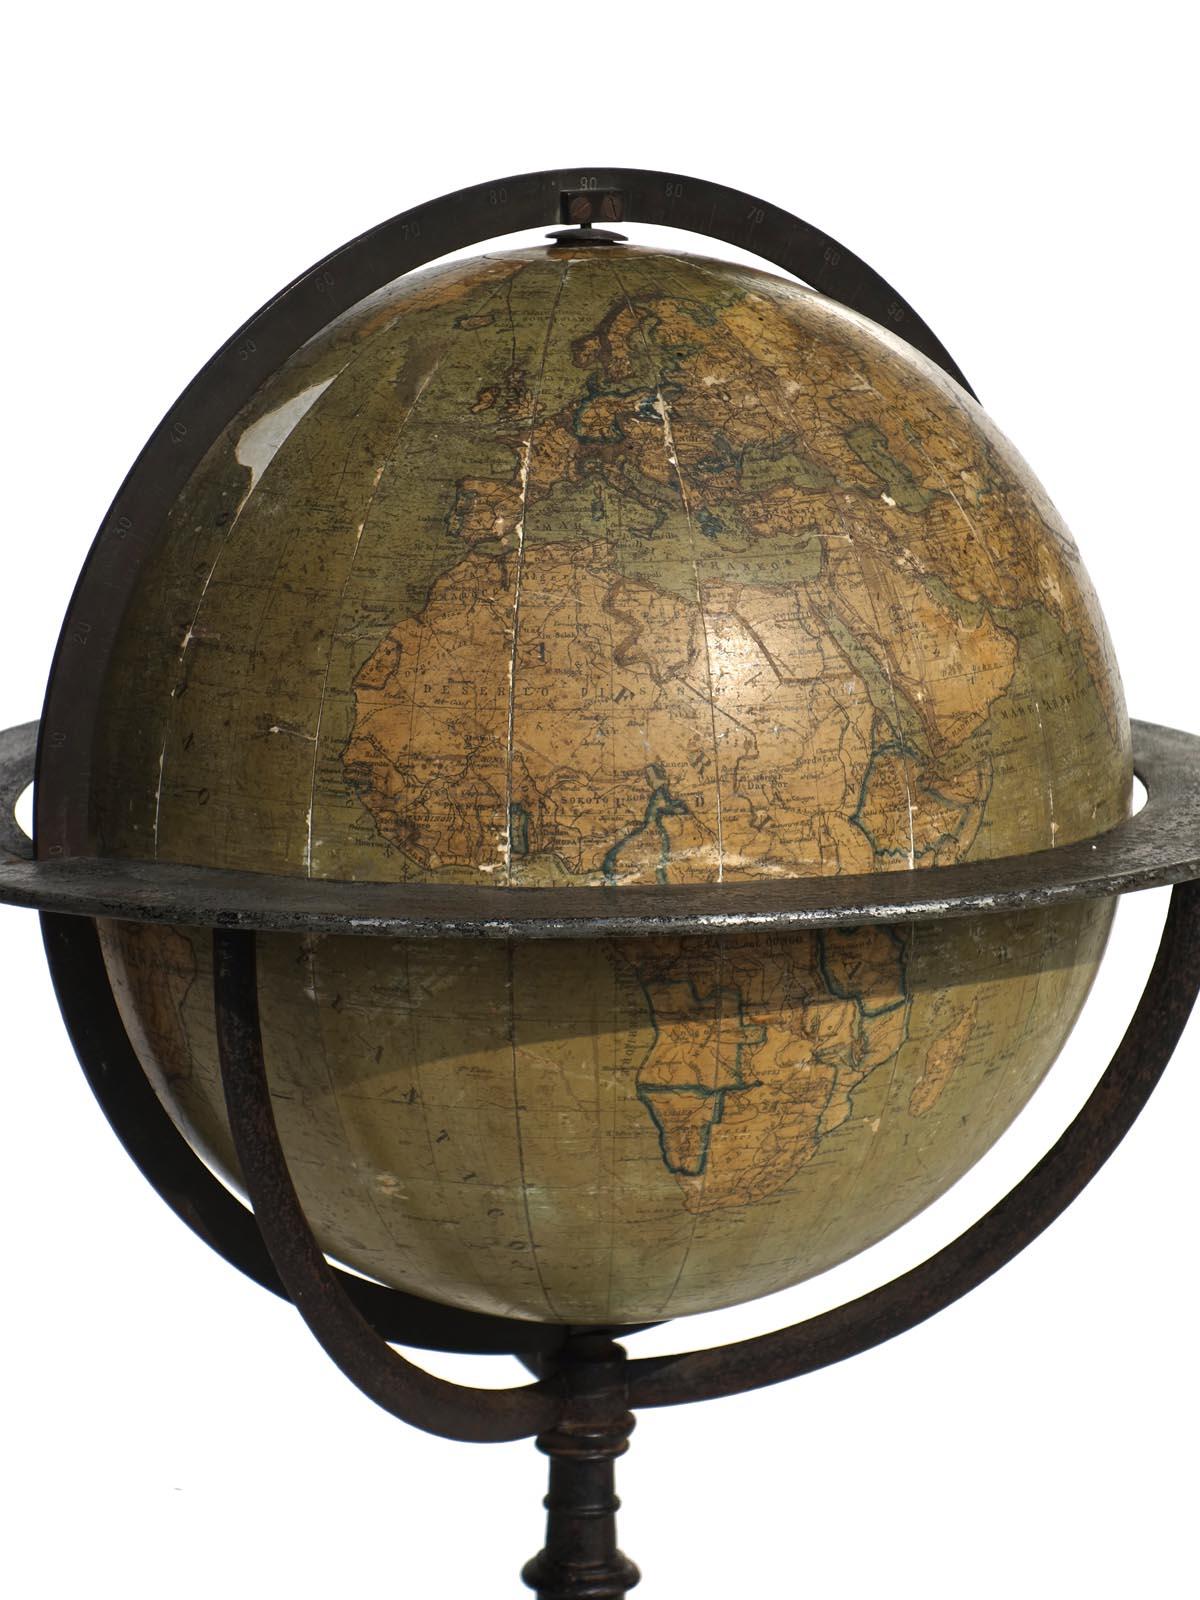 1905 terrestrial globe
Cast metal stand
Excellent condition.
 